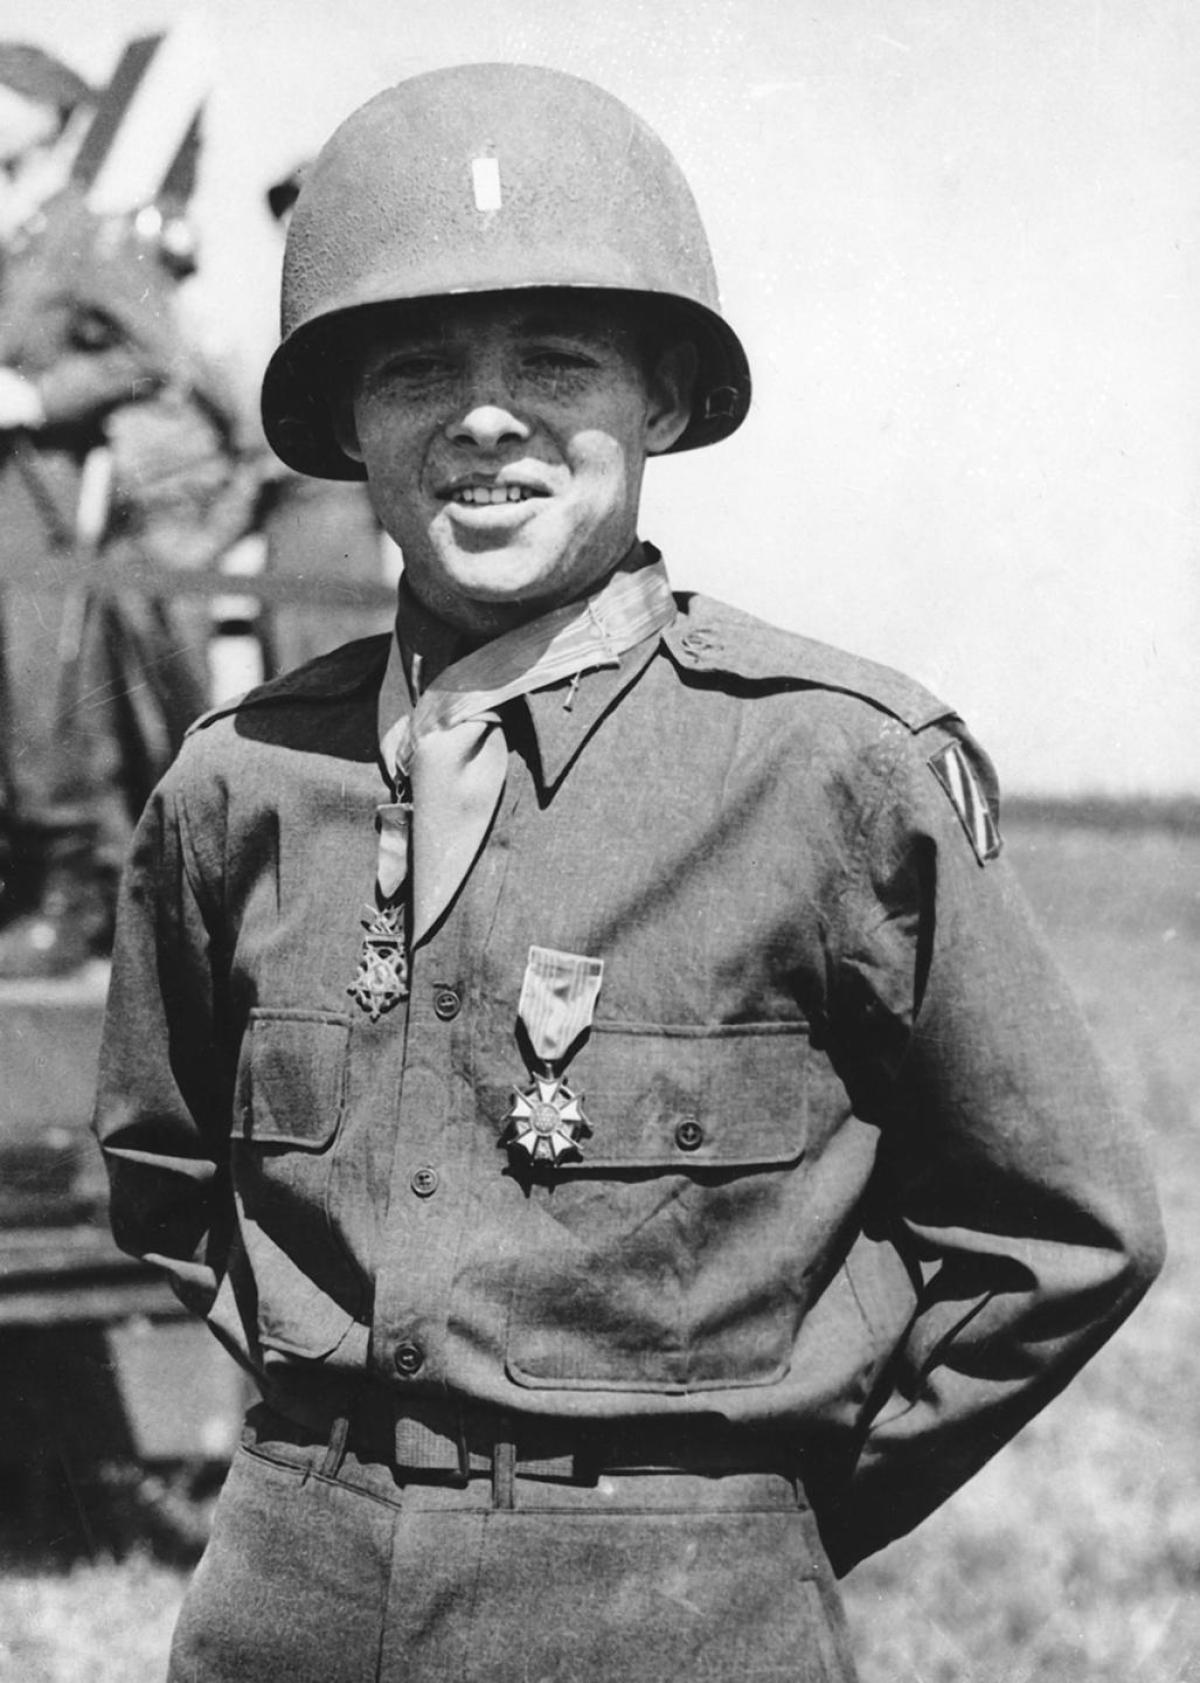 2nd Lieutenant Audie L. Murphy, wearing the Medal of Honor and Legion of merit, at Salzburg, Austria, 7 June 1945. (New York Daily News)